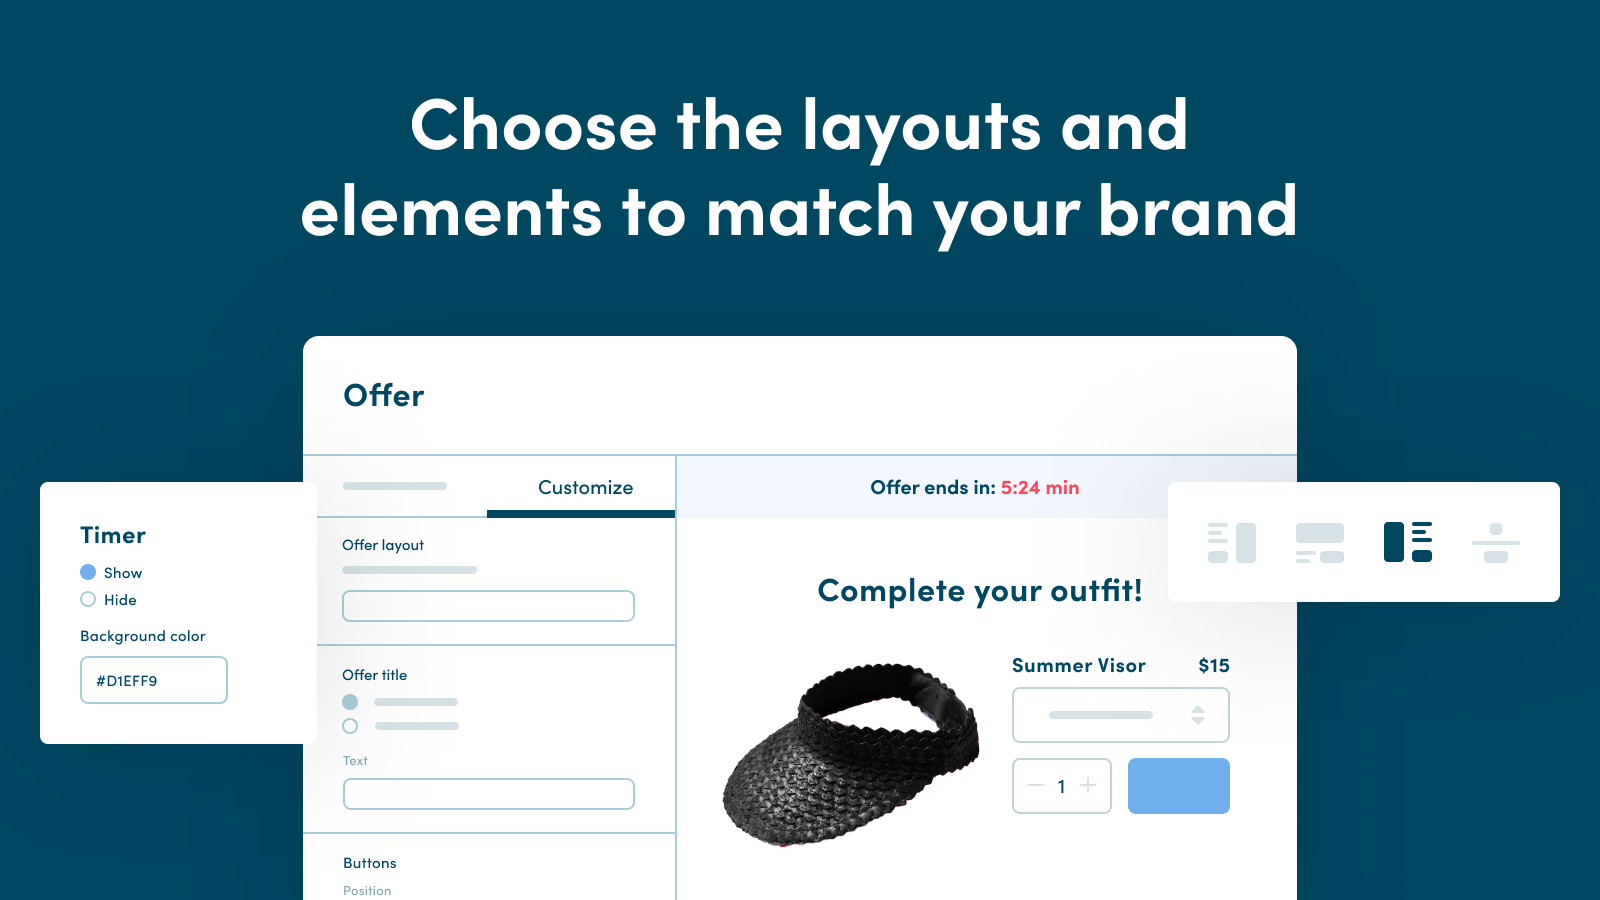 Choose the layouts and elements to match your brand